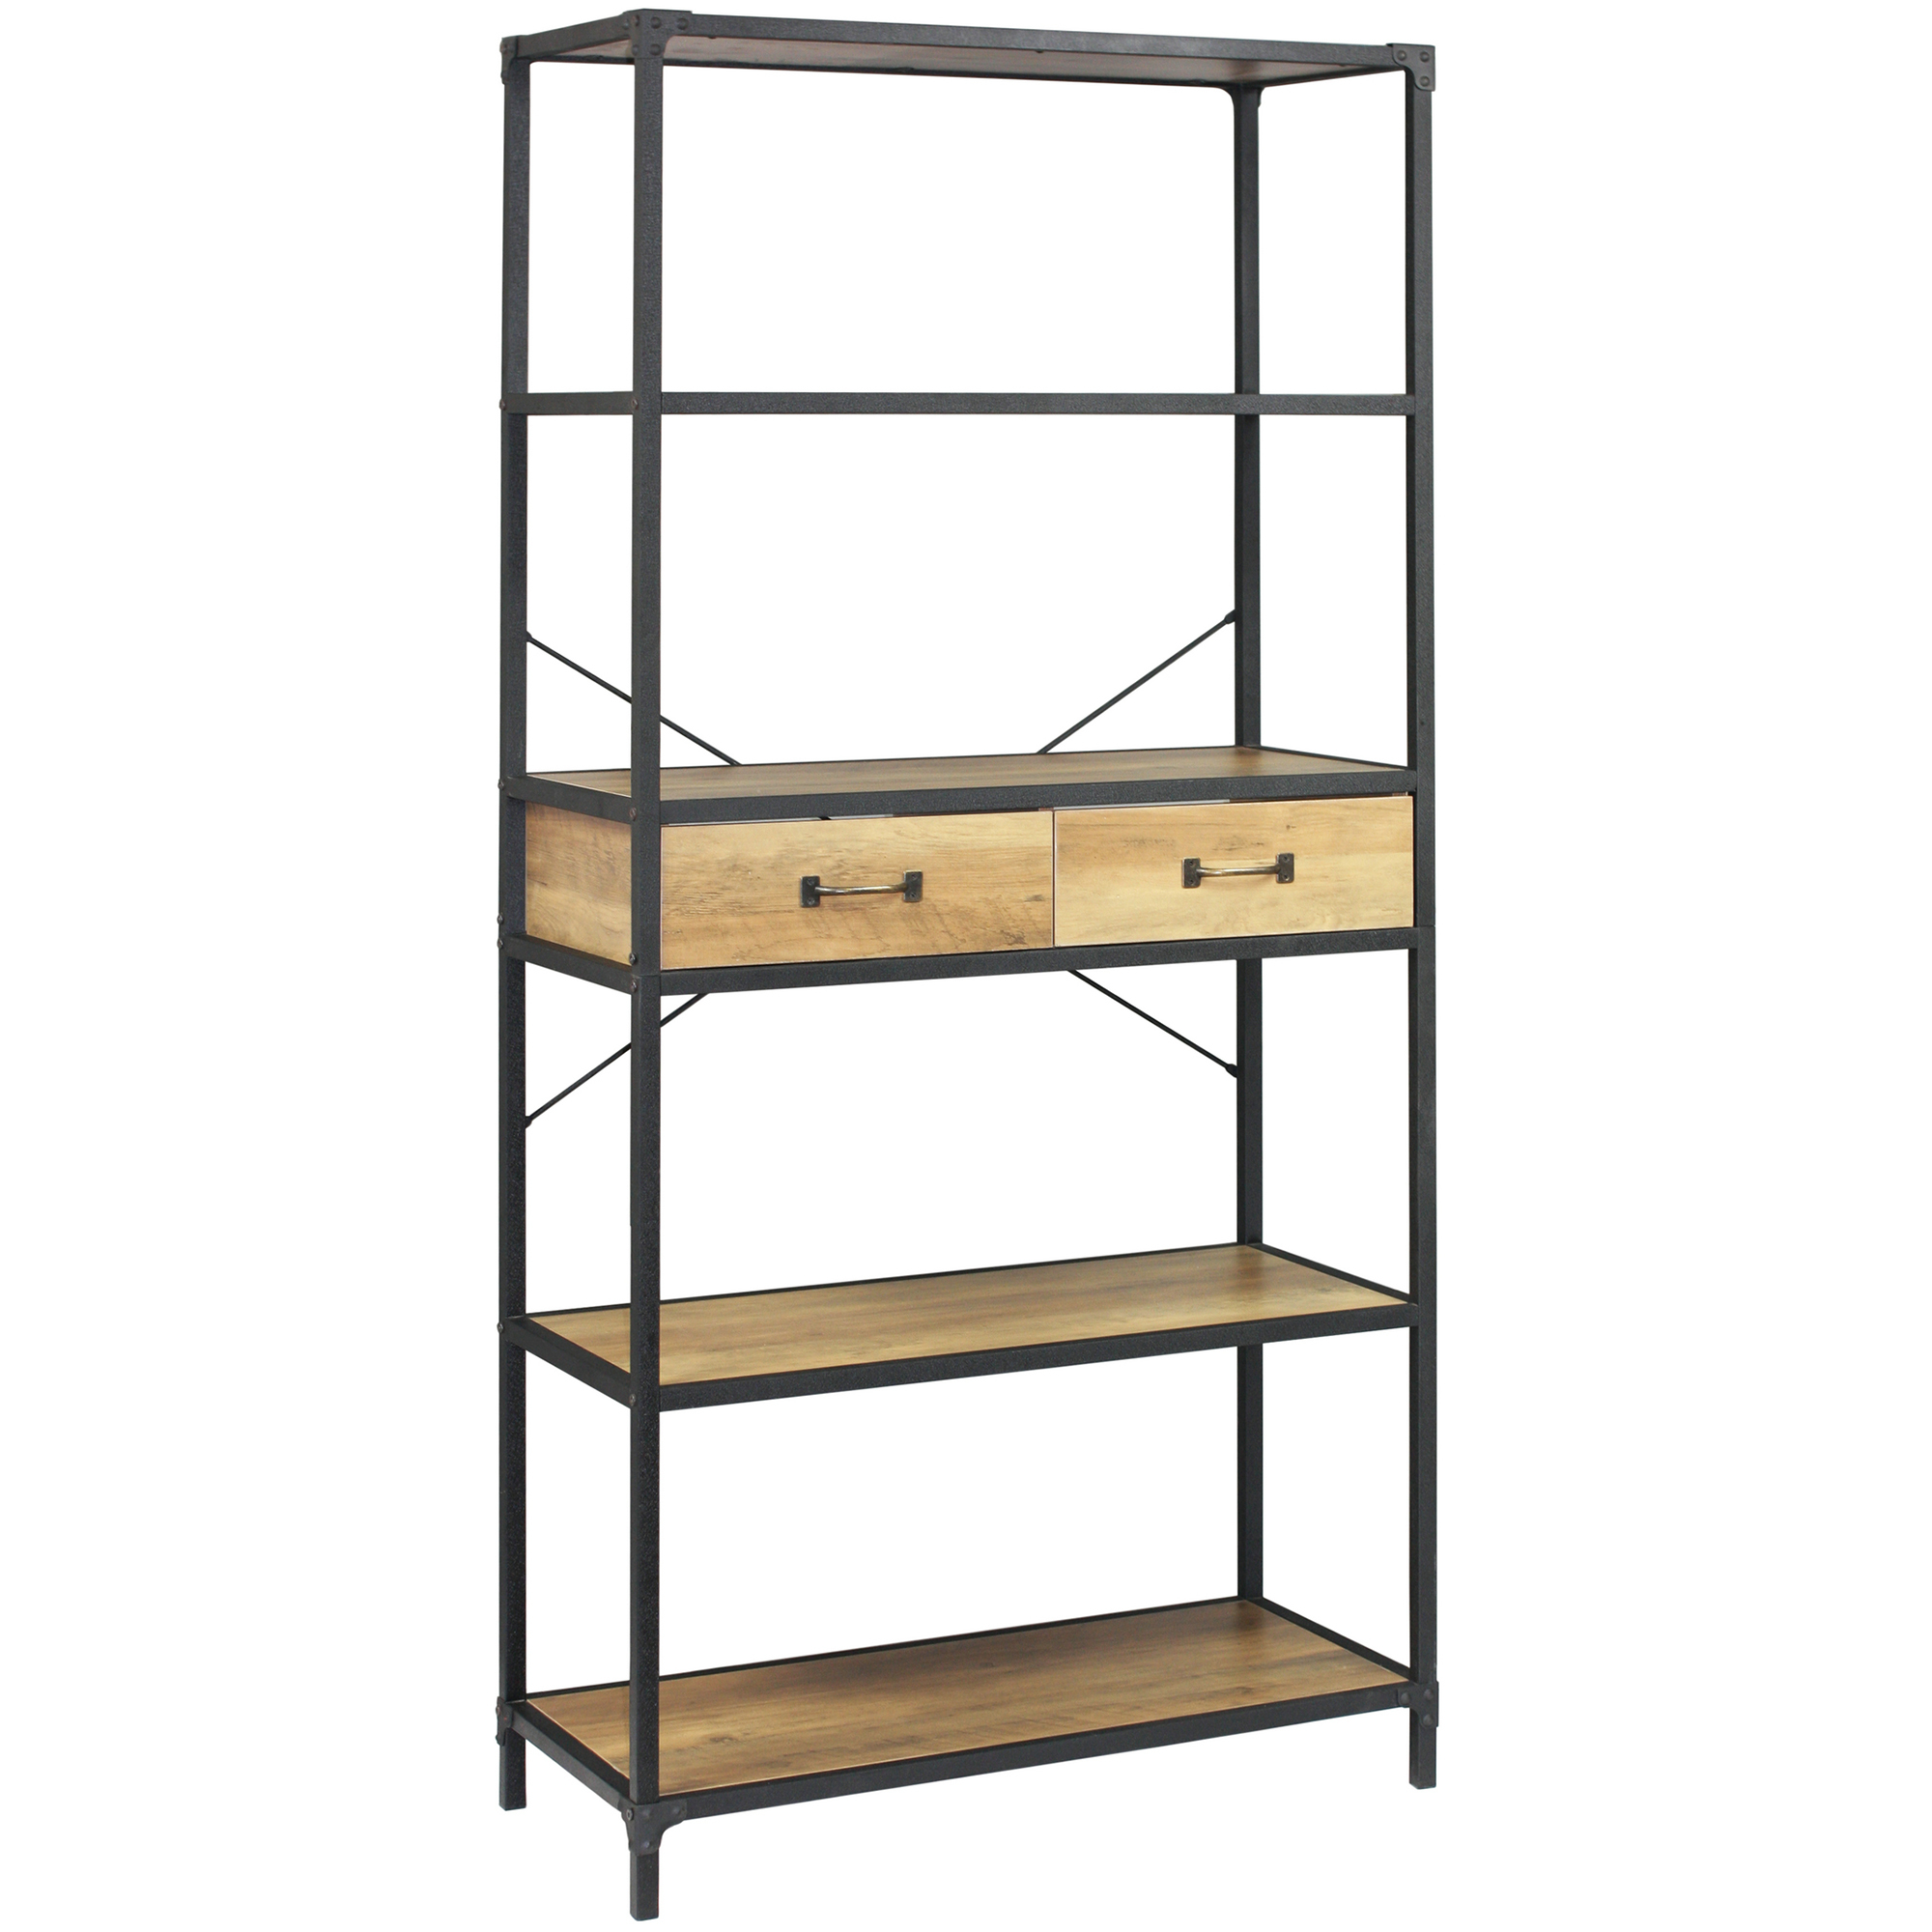 Lifestyle Traders Soho Wooden Shelving Unit With Drawers Reviews